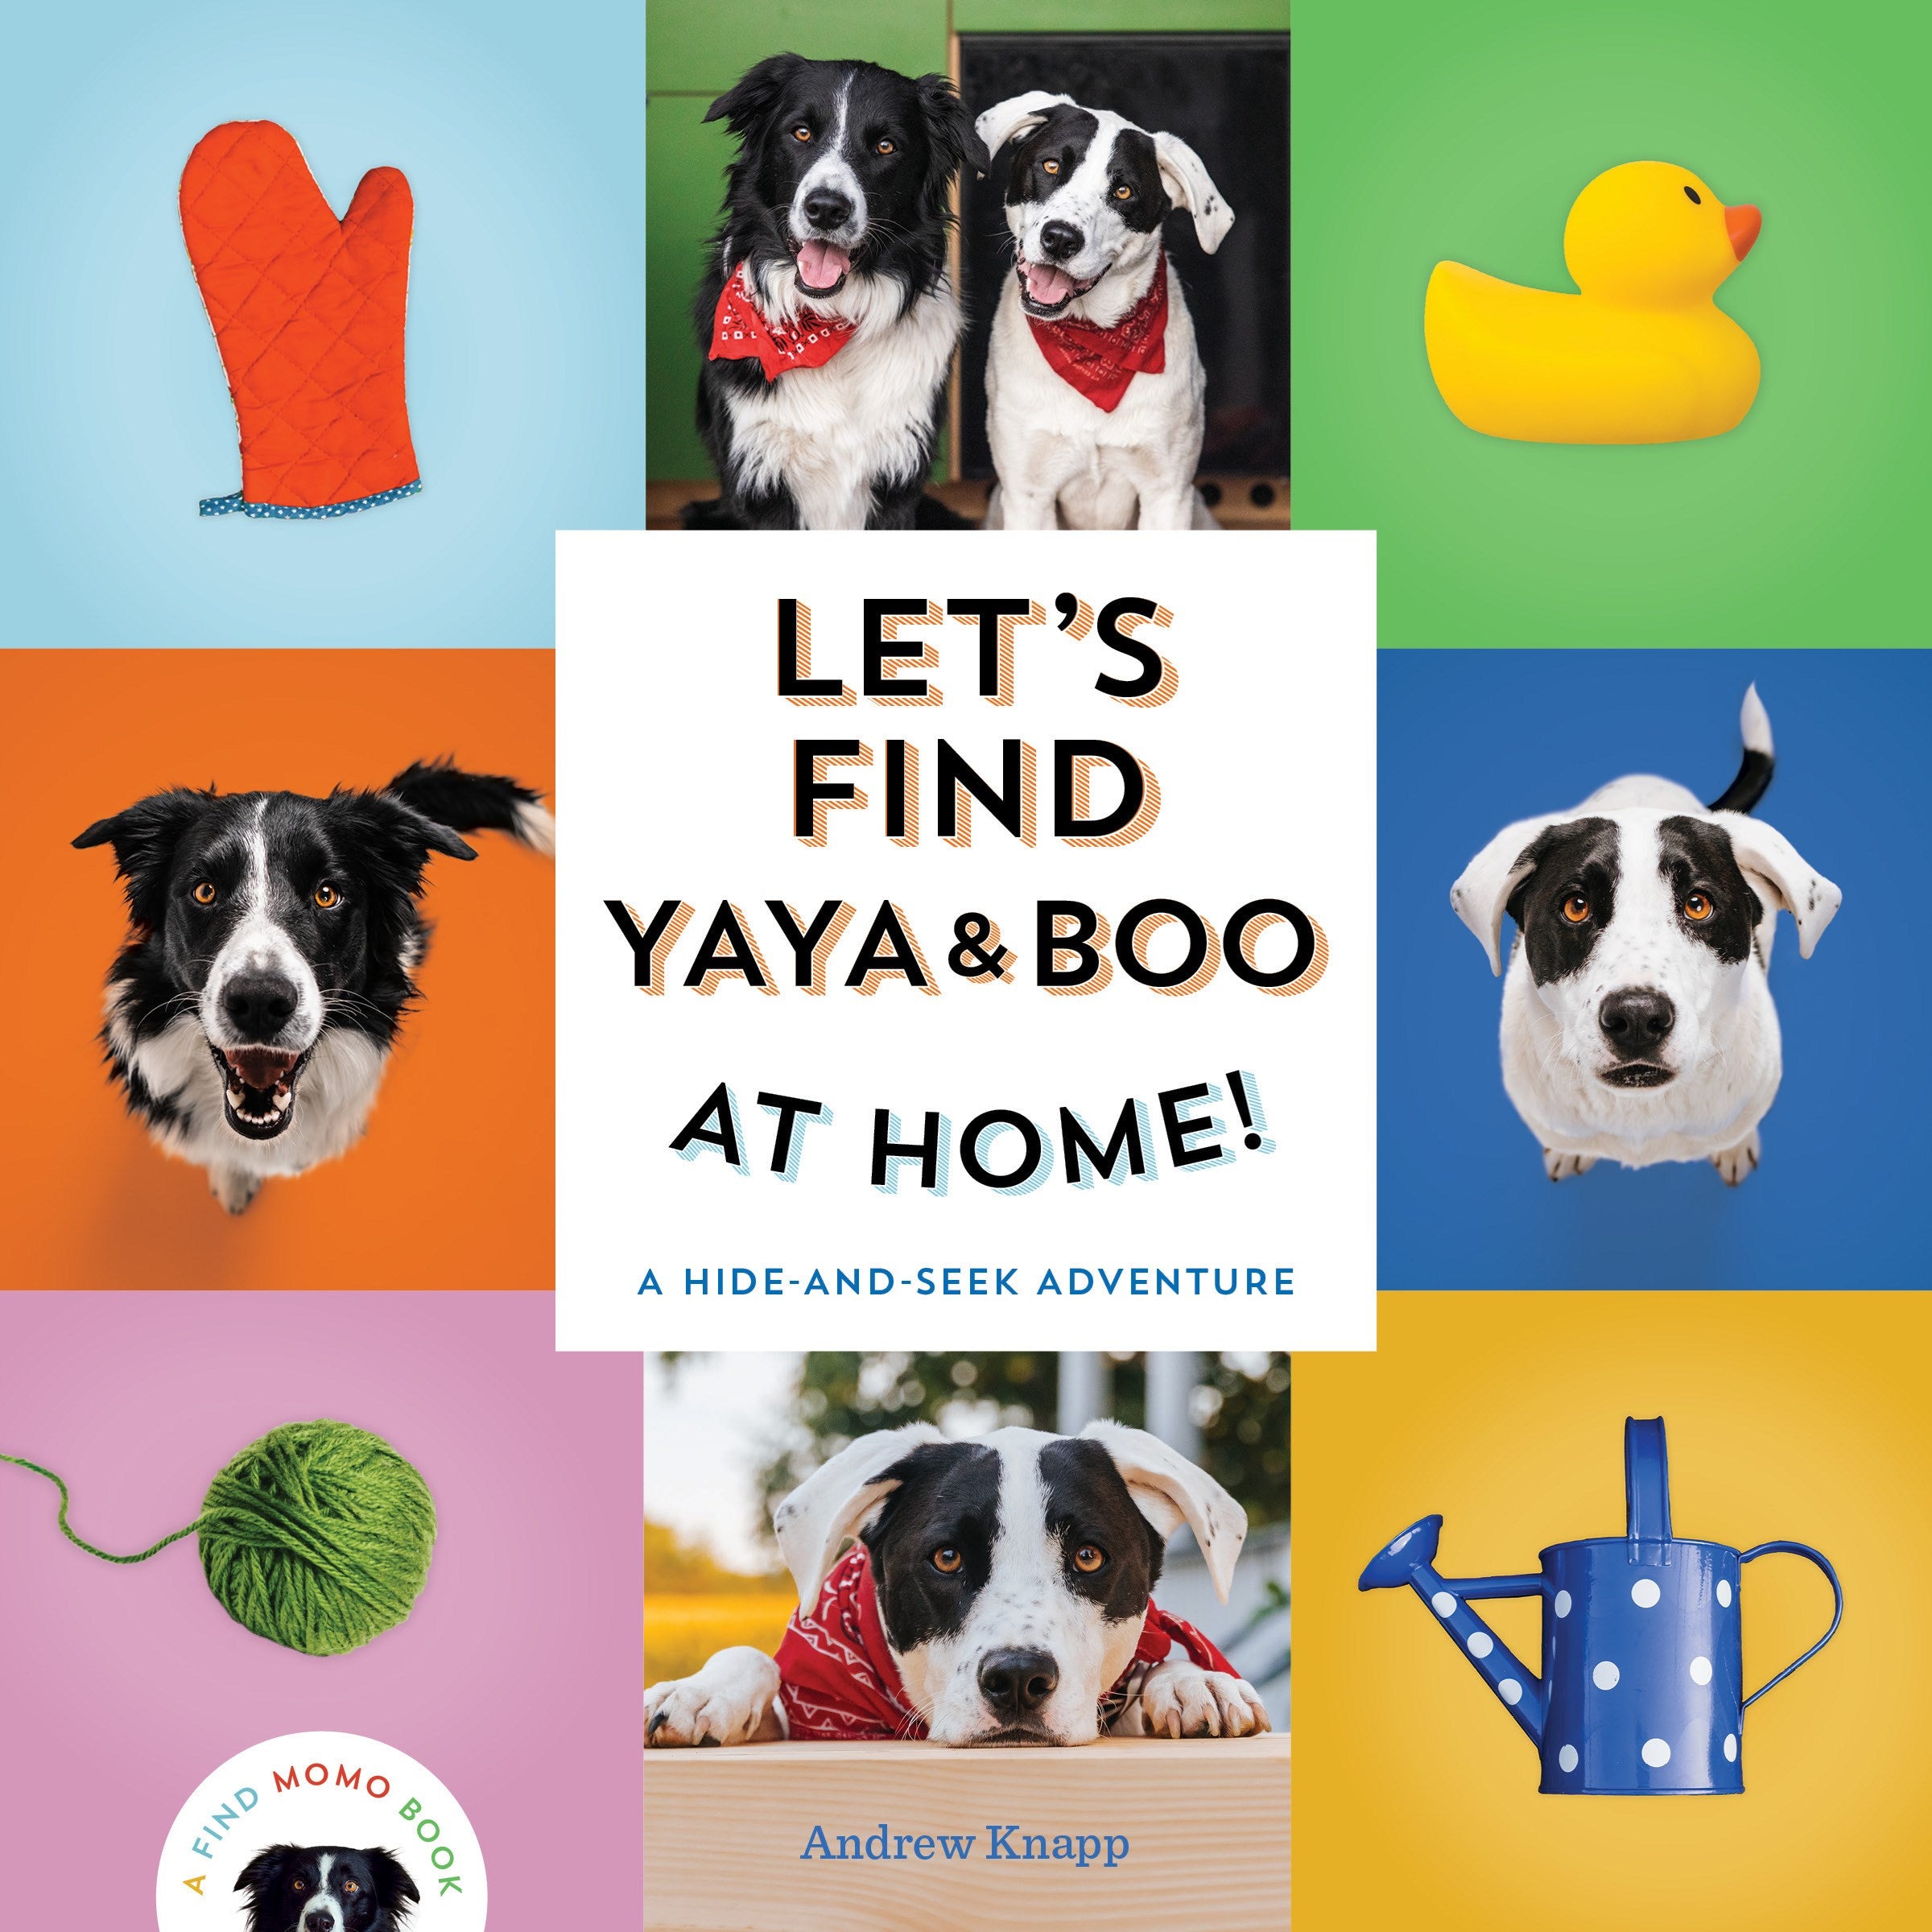 Let's Find Yaya and Boo at Home!: A Hide-and-Seek Adventure